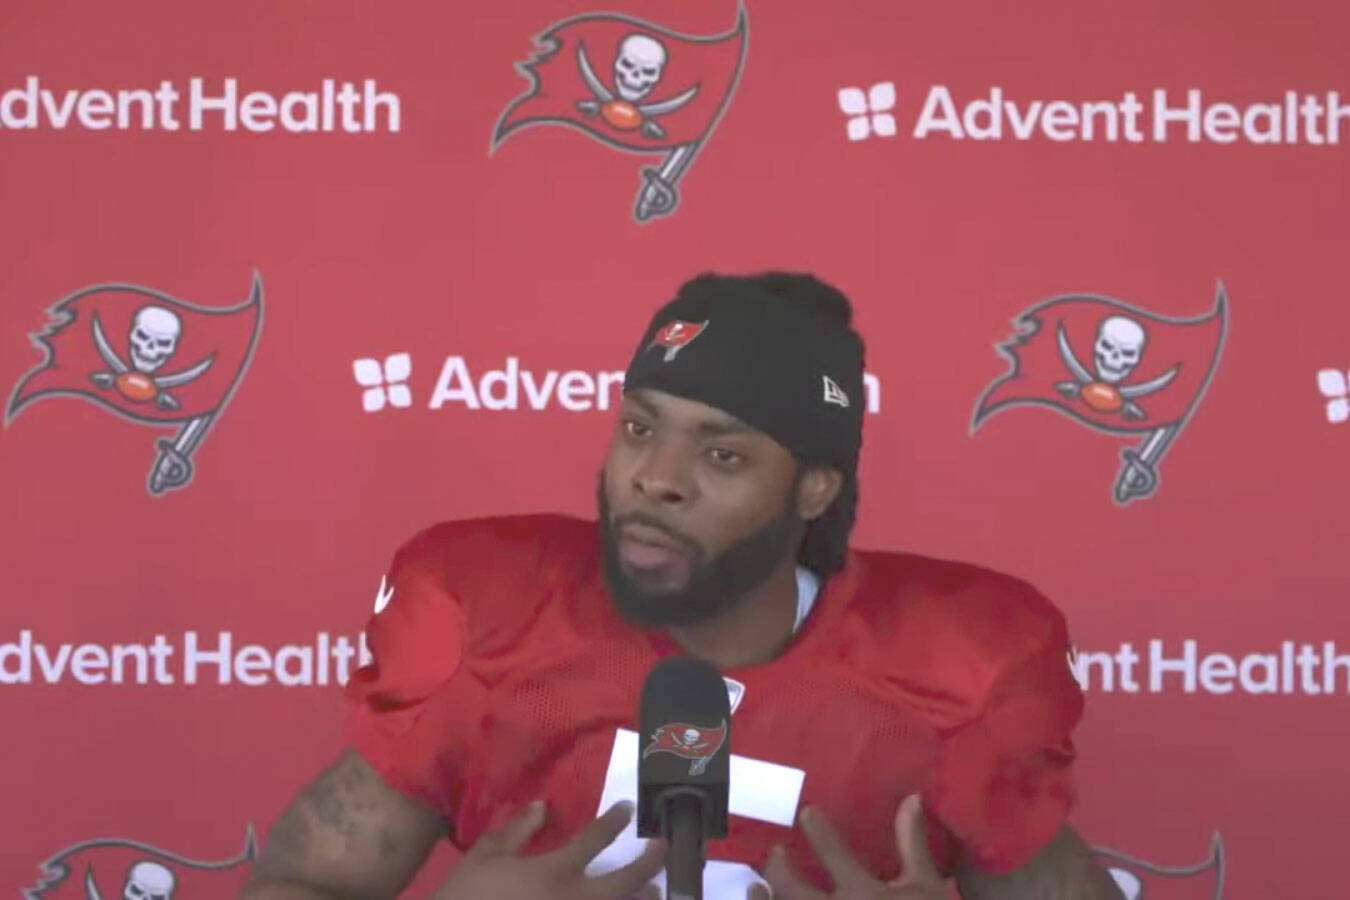 Screenshot taken from Sept. 29 press conference from Tampa Bay Buccaneers’ Youtube